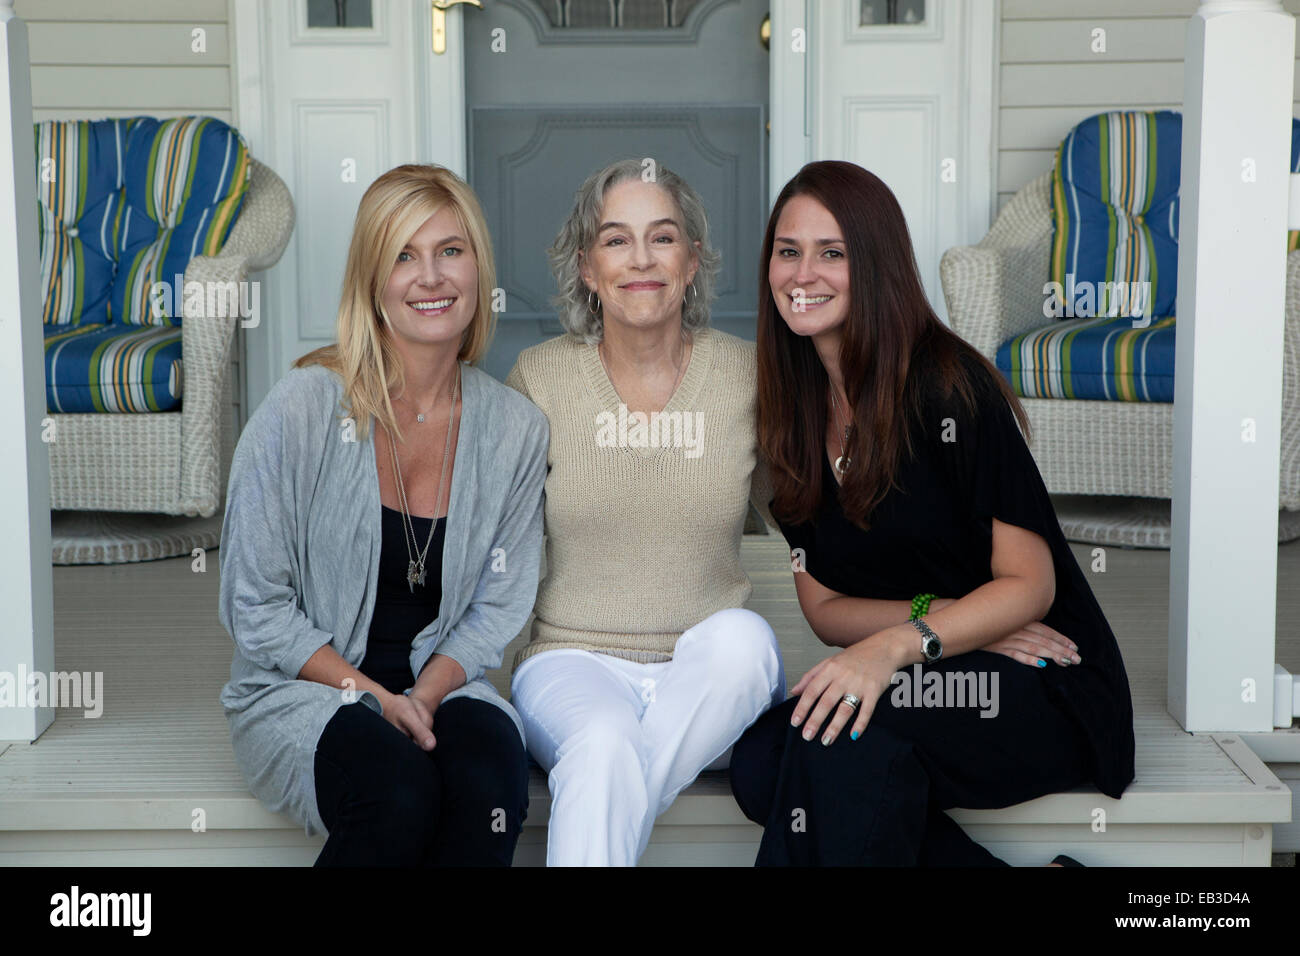 Caucasian mother and daughters smiling on front porch Stock Photo